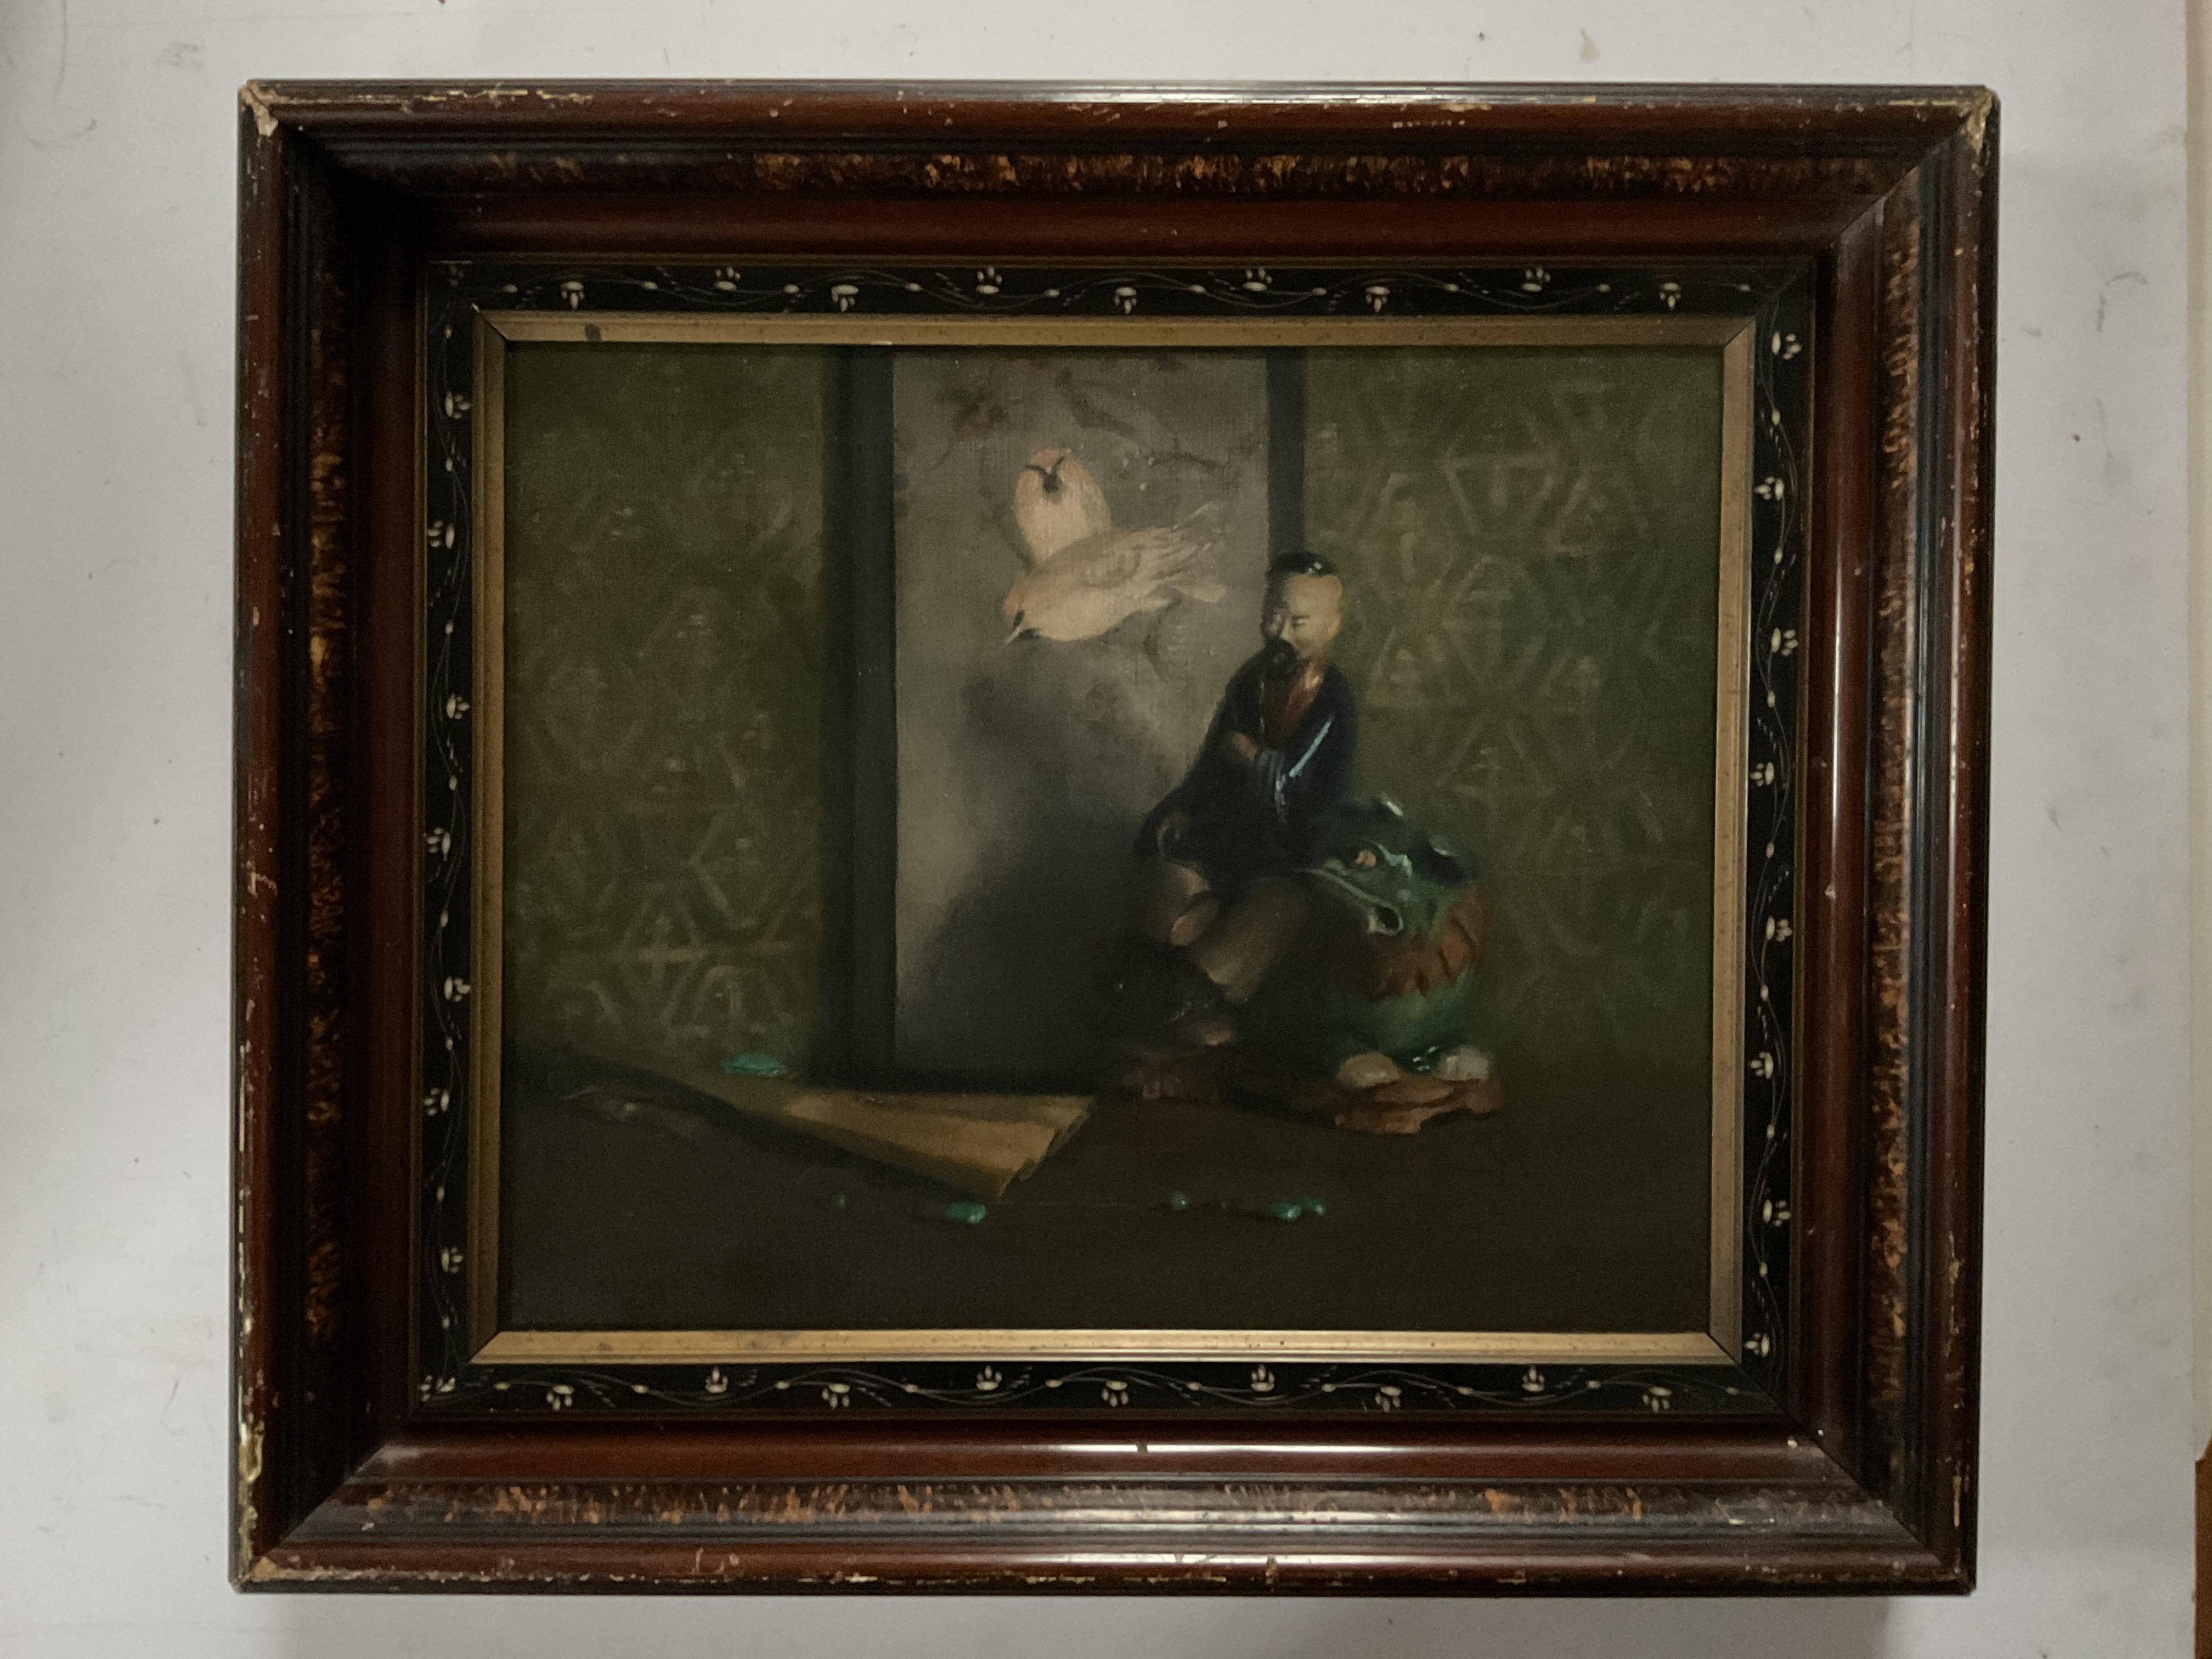 Exquisite Antique Still Life, Japanese Figures, Oil on Canvas by Caroline Pitkin